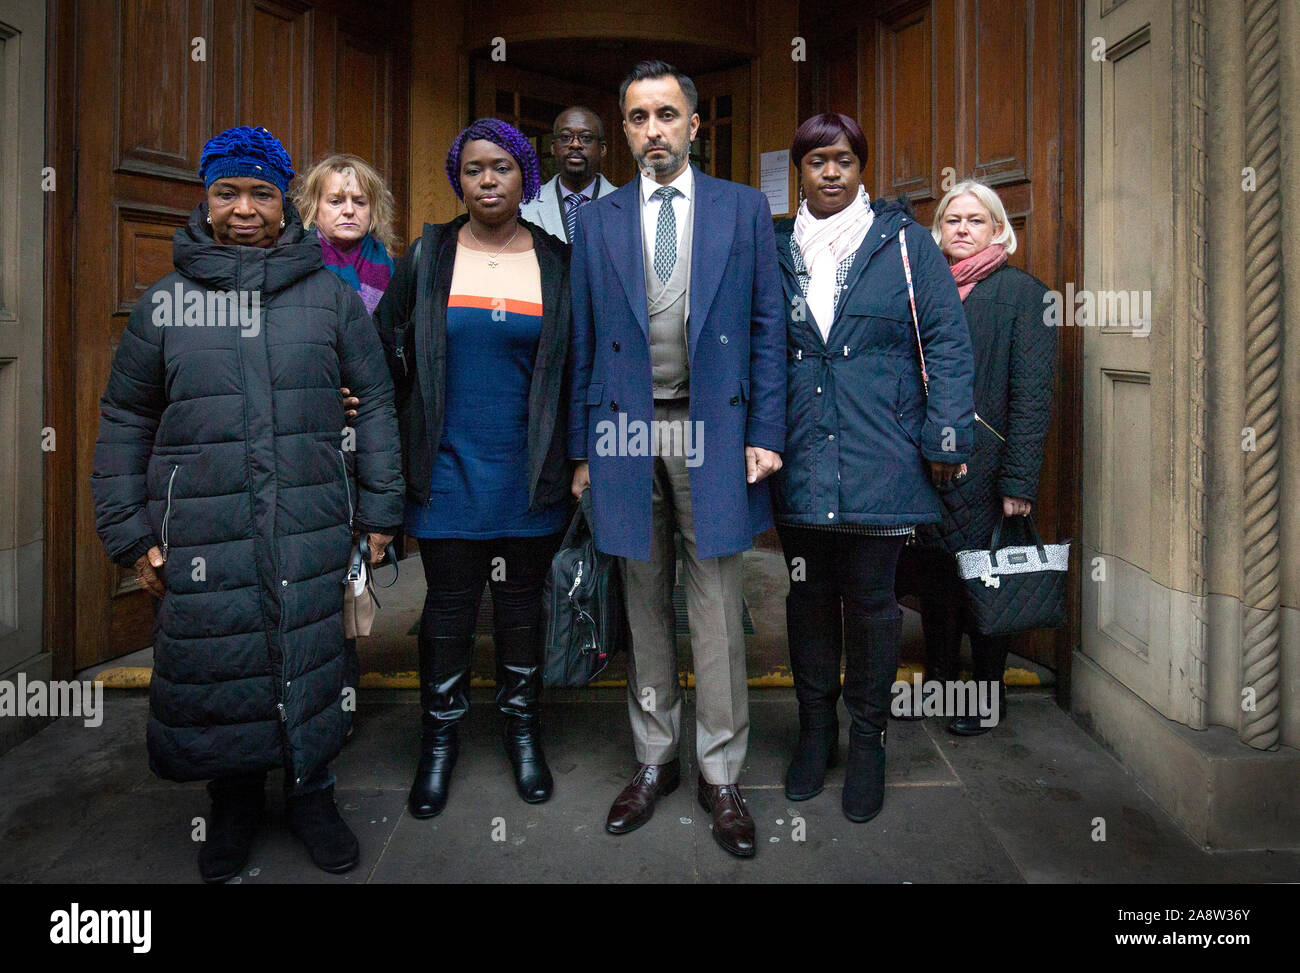 Solicitor Aamer Anwar (centre) arrives at the Crown Office in Edinburgh, with family members of the late Sheku Bayoh, including his mother Aminata (left), who died in police custody in 2015. At a meeting, the family of Mr Bayoh, along with their solicitor Aamer Anwar, will speak with the Lord Advocate, Solicitor General for Scotland Alison Di Rollo QC, Crown Counsel Alex Prentice QC, and Deputy Crown Agent Lindsey Miller. Stock Photo